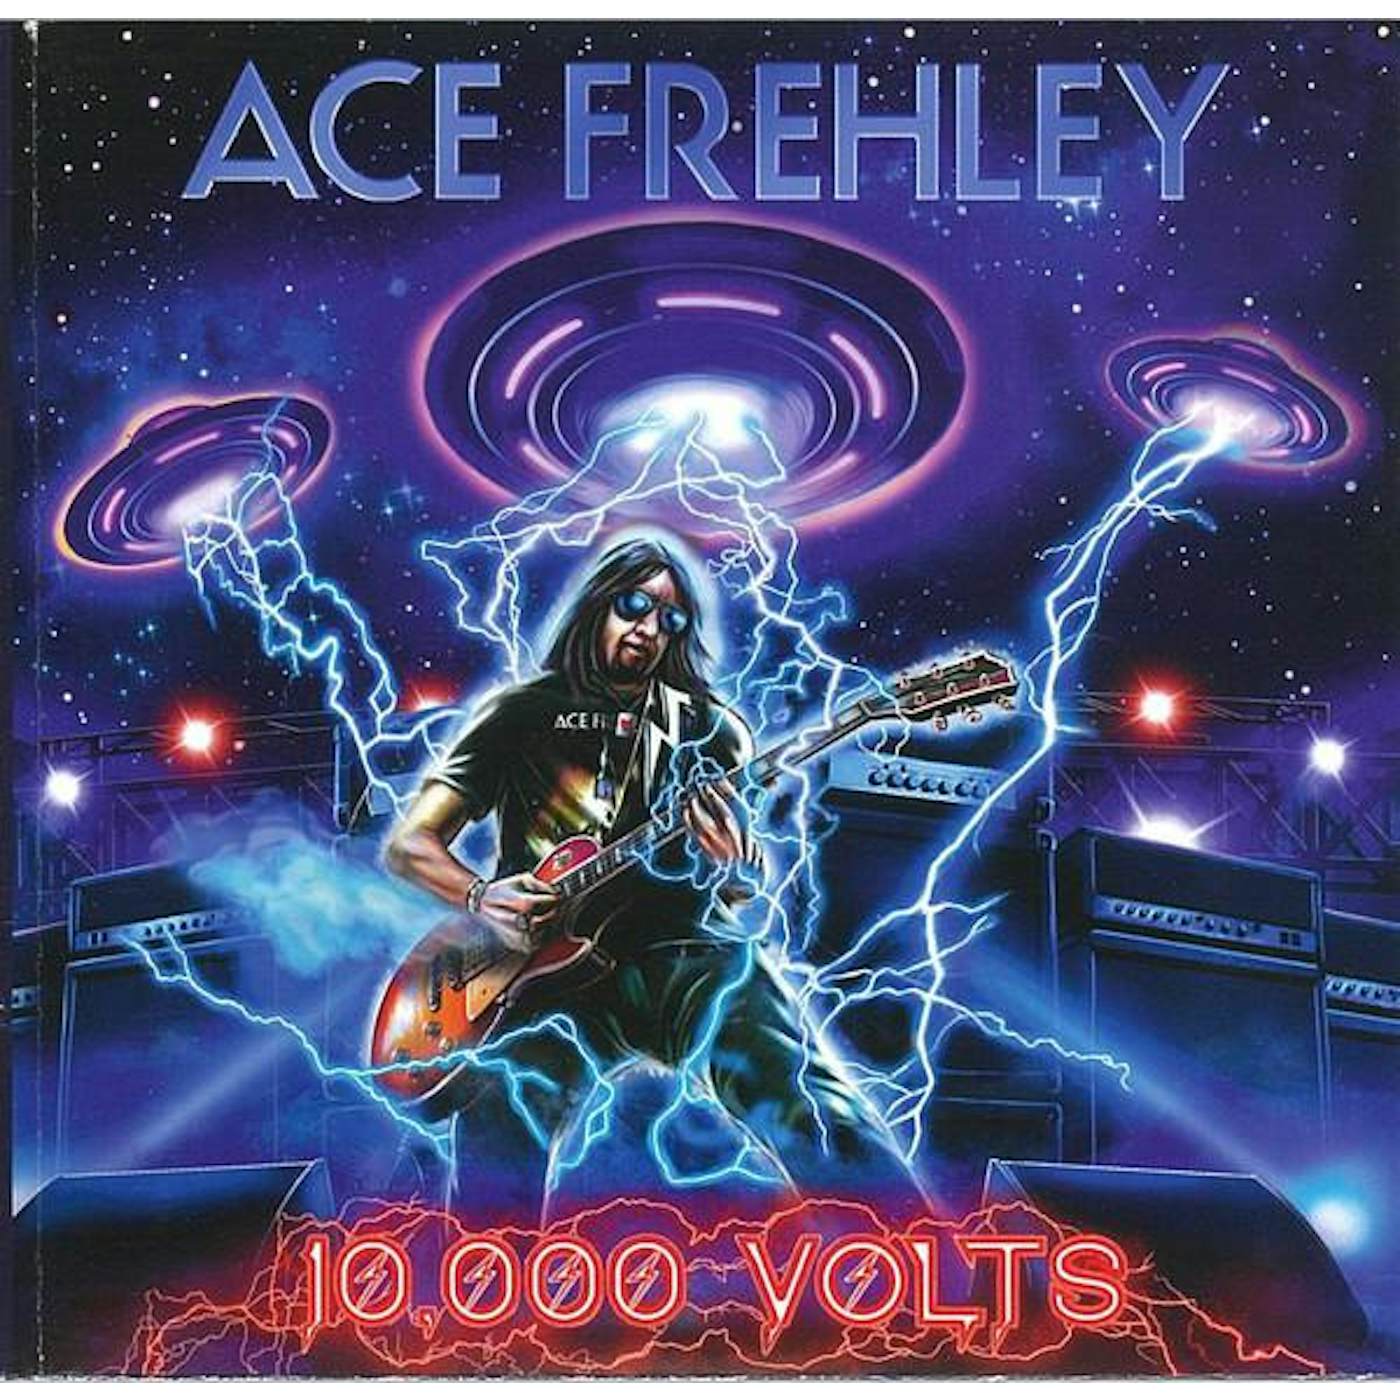 Ace Frehley 10,000 VOLTS CD